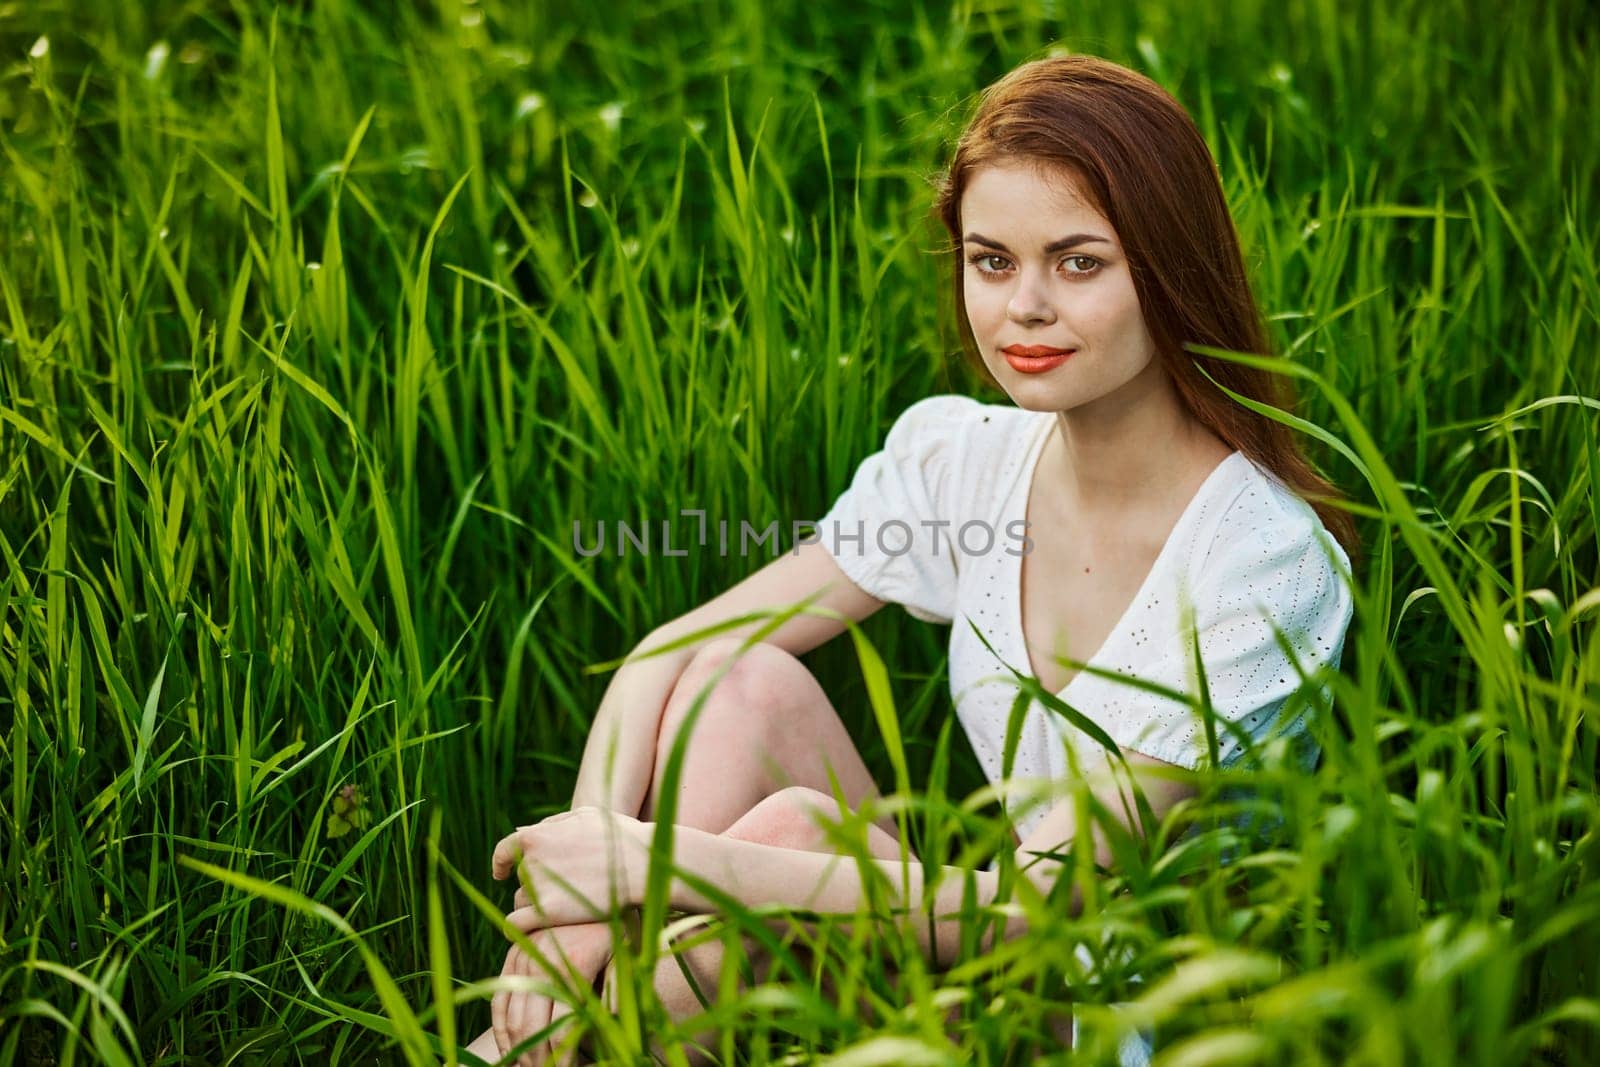 adorable, smiling woman sitting in nature relaxing in tall grass looking at camera by Vichizh